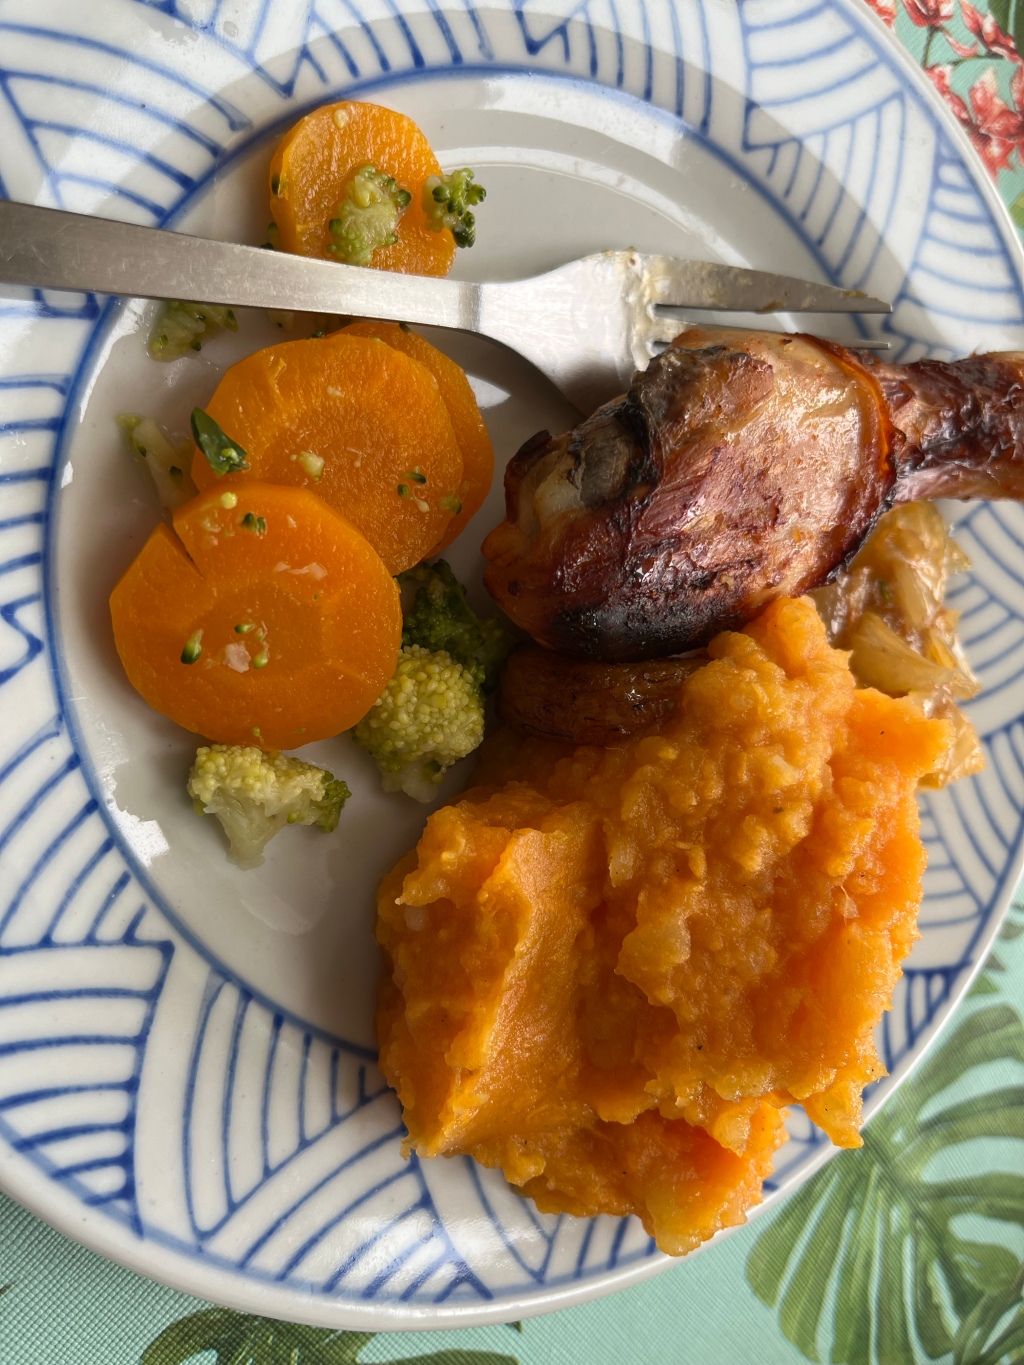 Traybake chicken with sweet potato mash, vegetables and fried plantain